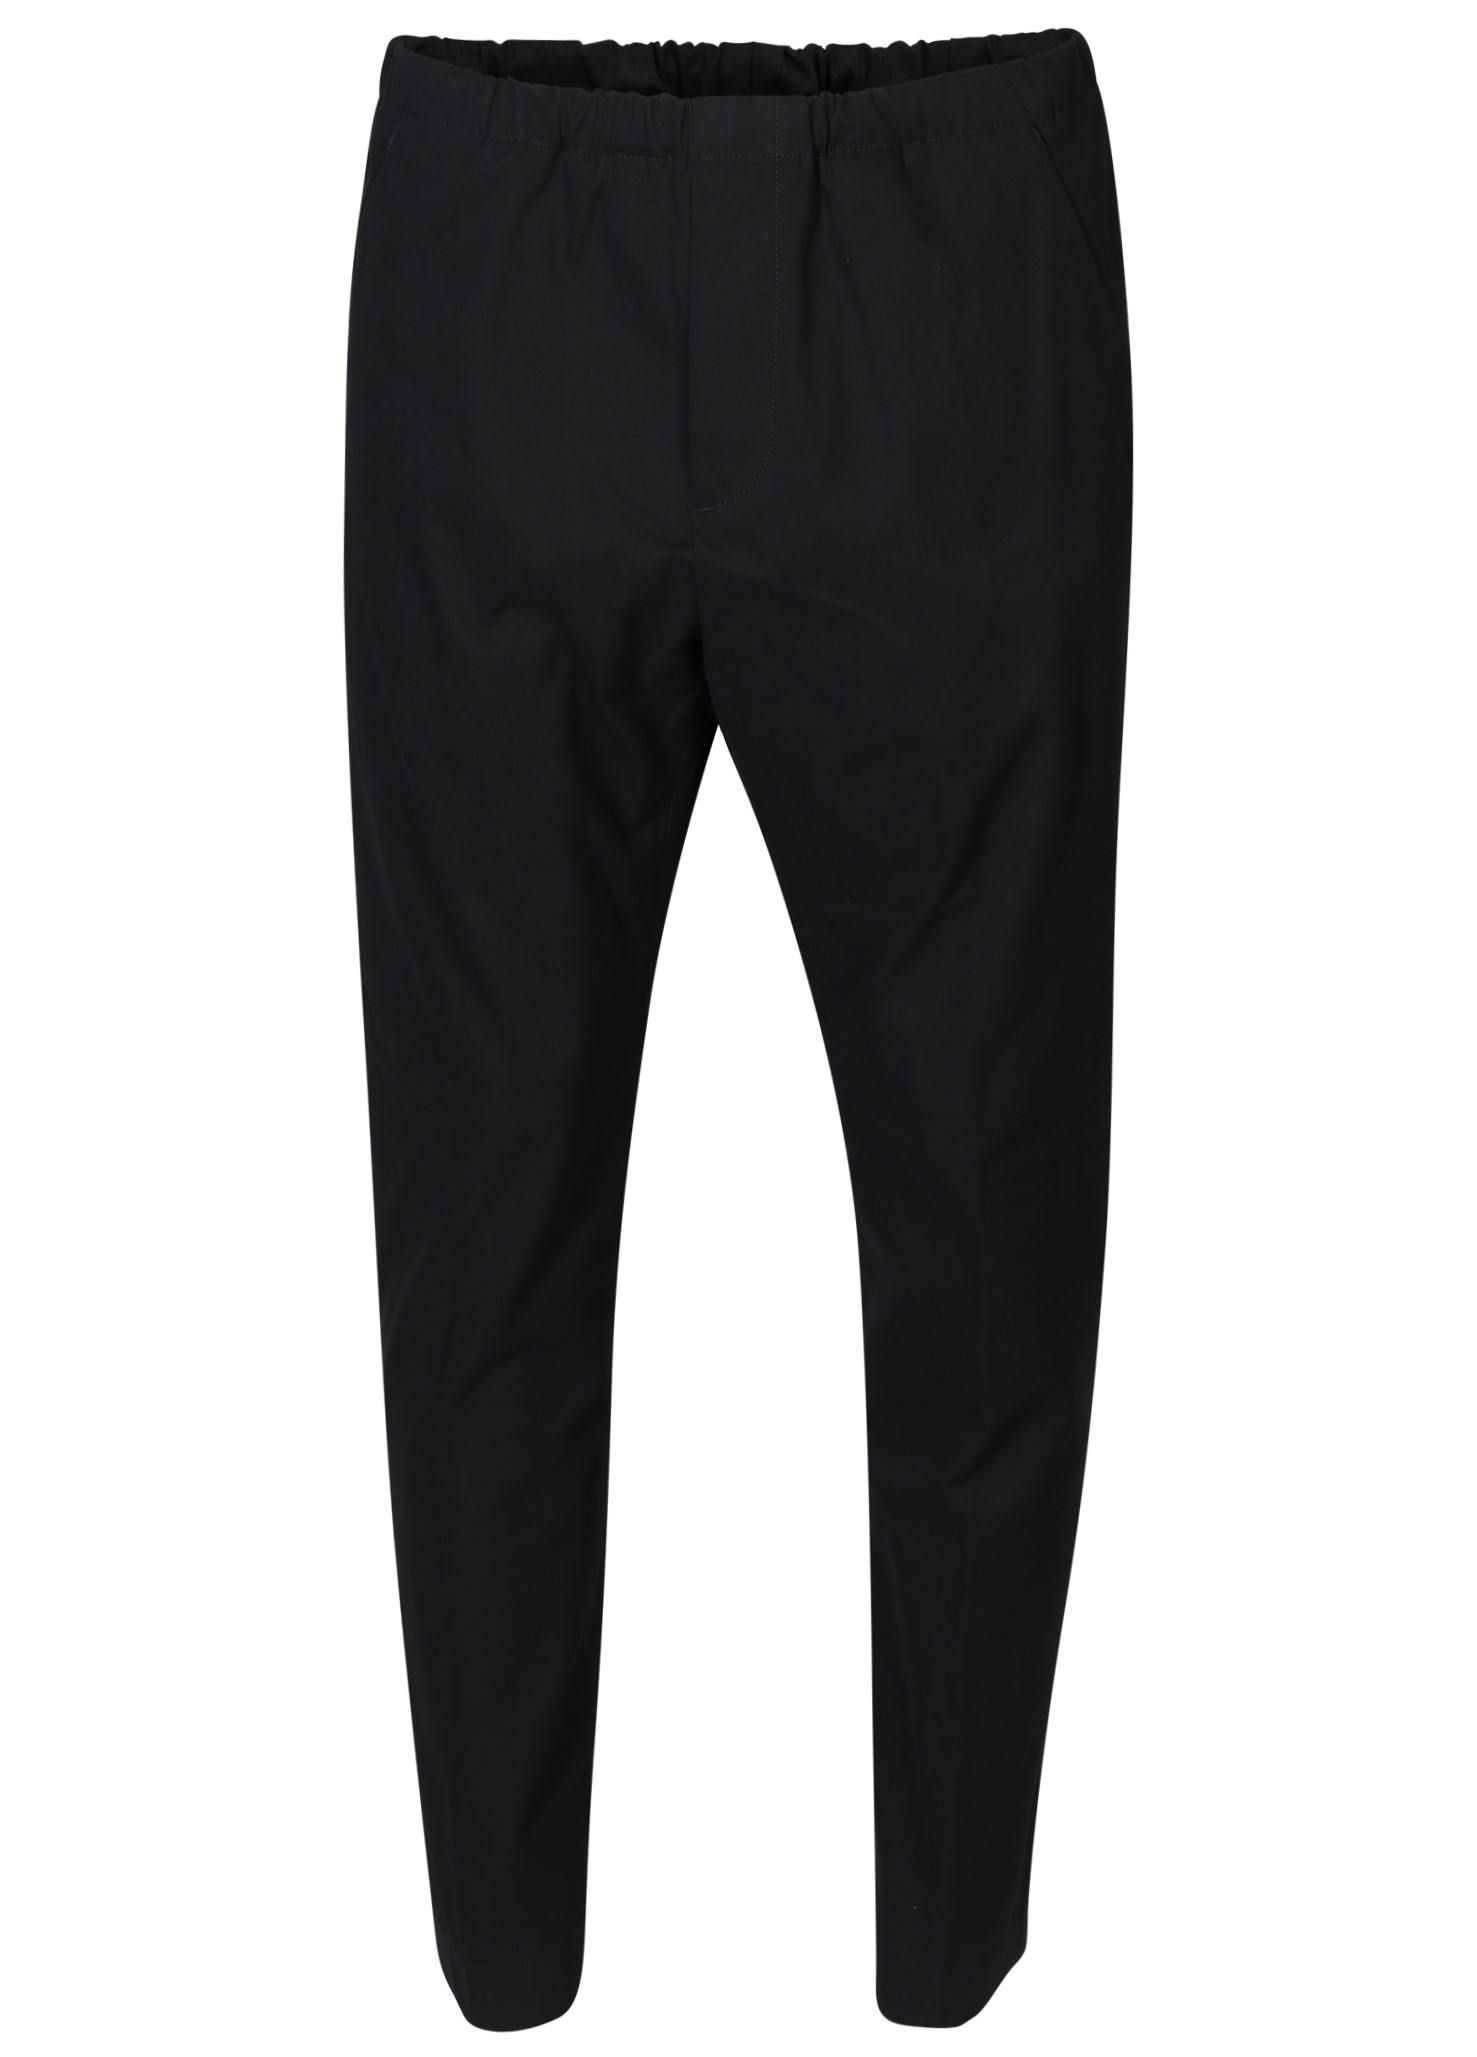 NINE:INTHE:MORNING Mirco Carrot Cotton Stretch Pant in Black